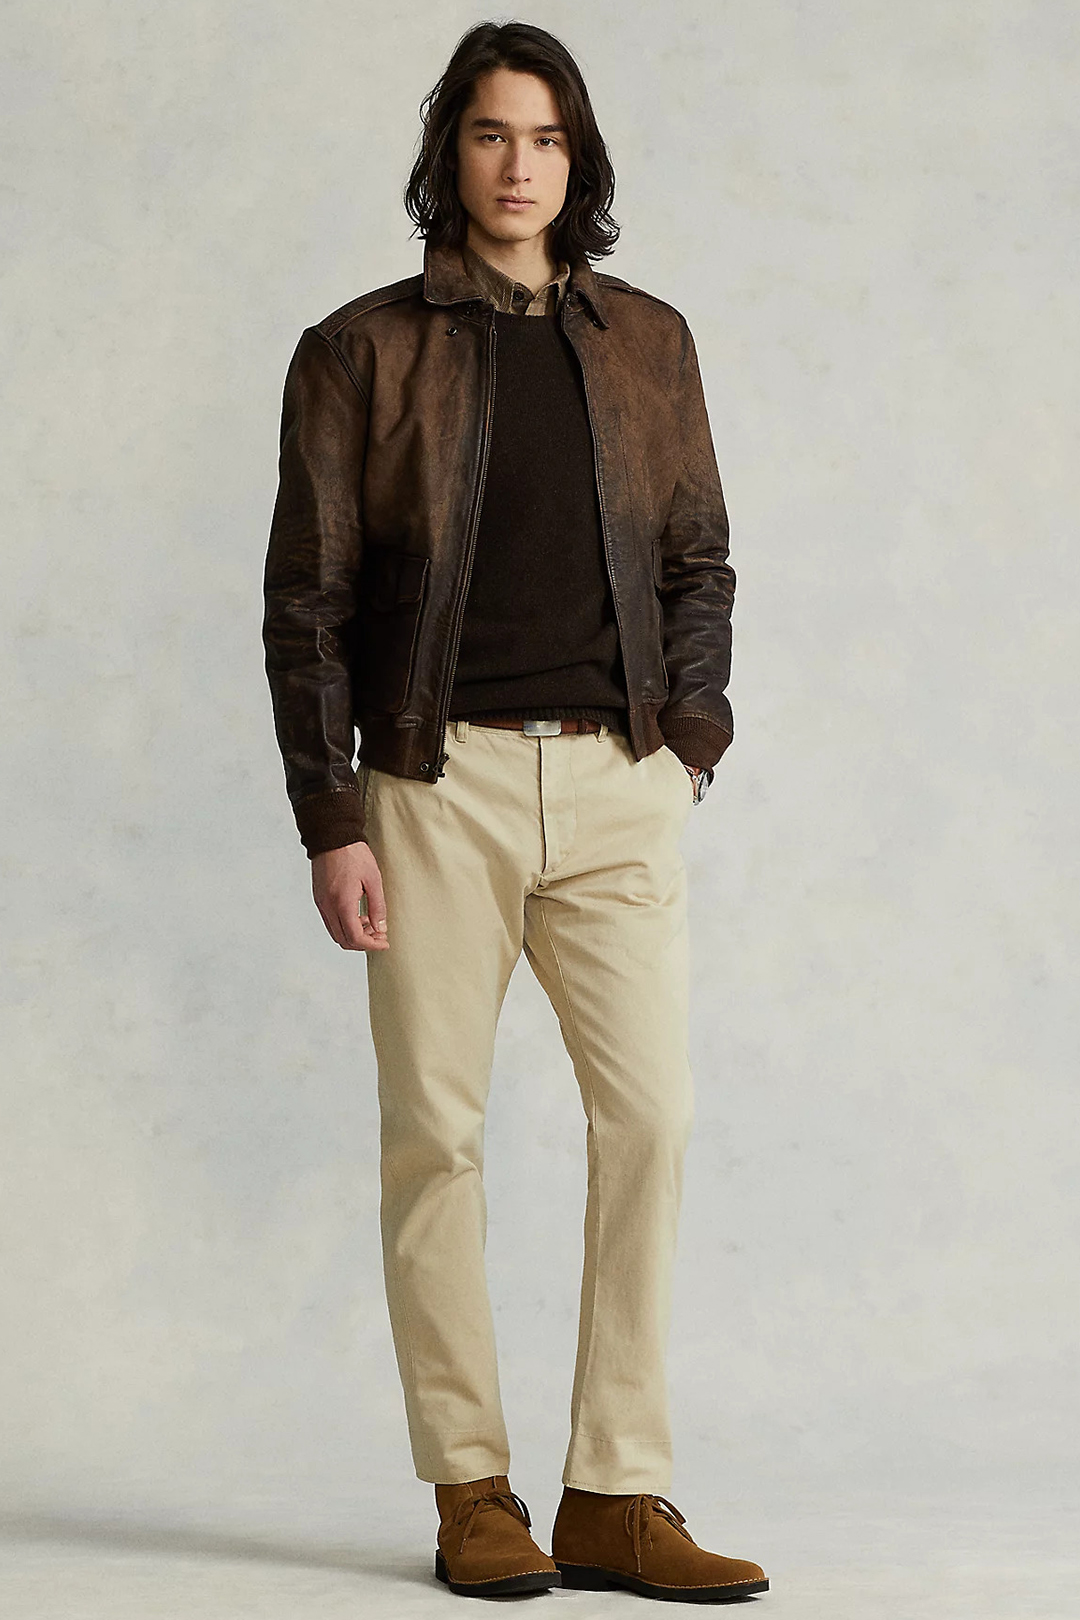 Dark brown leather bomber jacket, light brown shirt, brown sweater, khaki chinos, and brown suede desert boots outfit